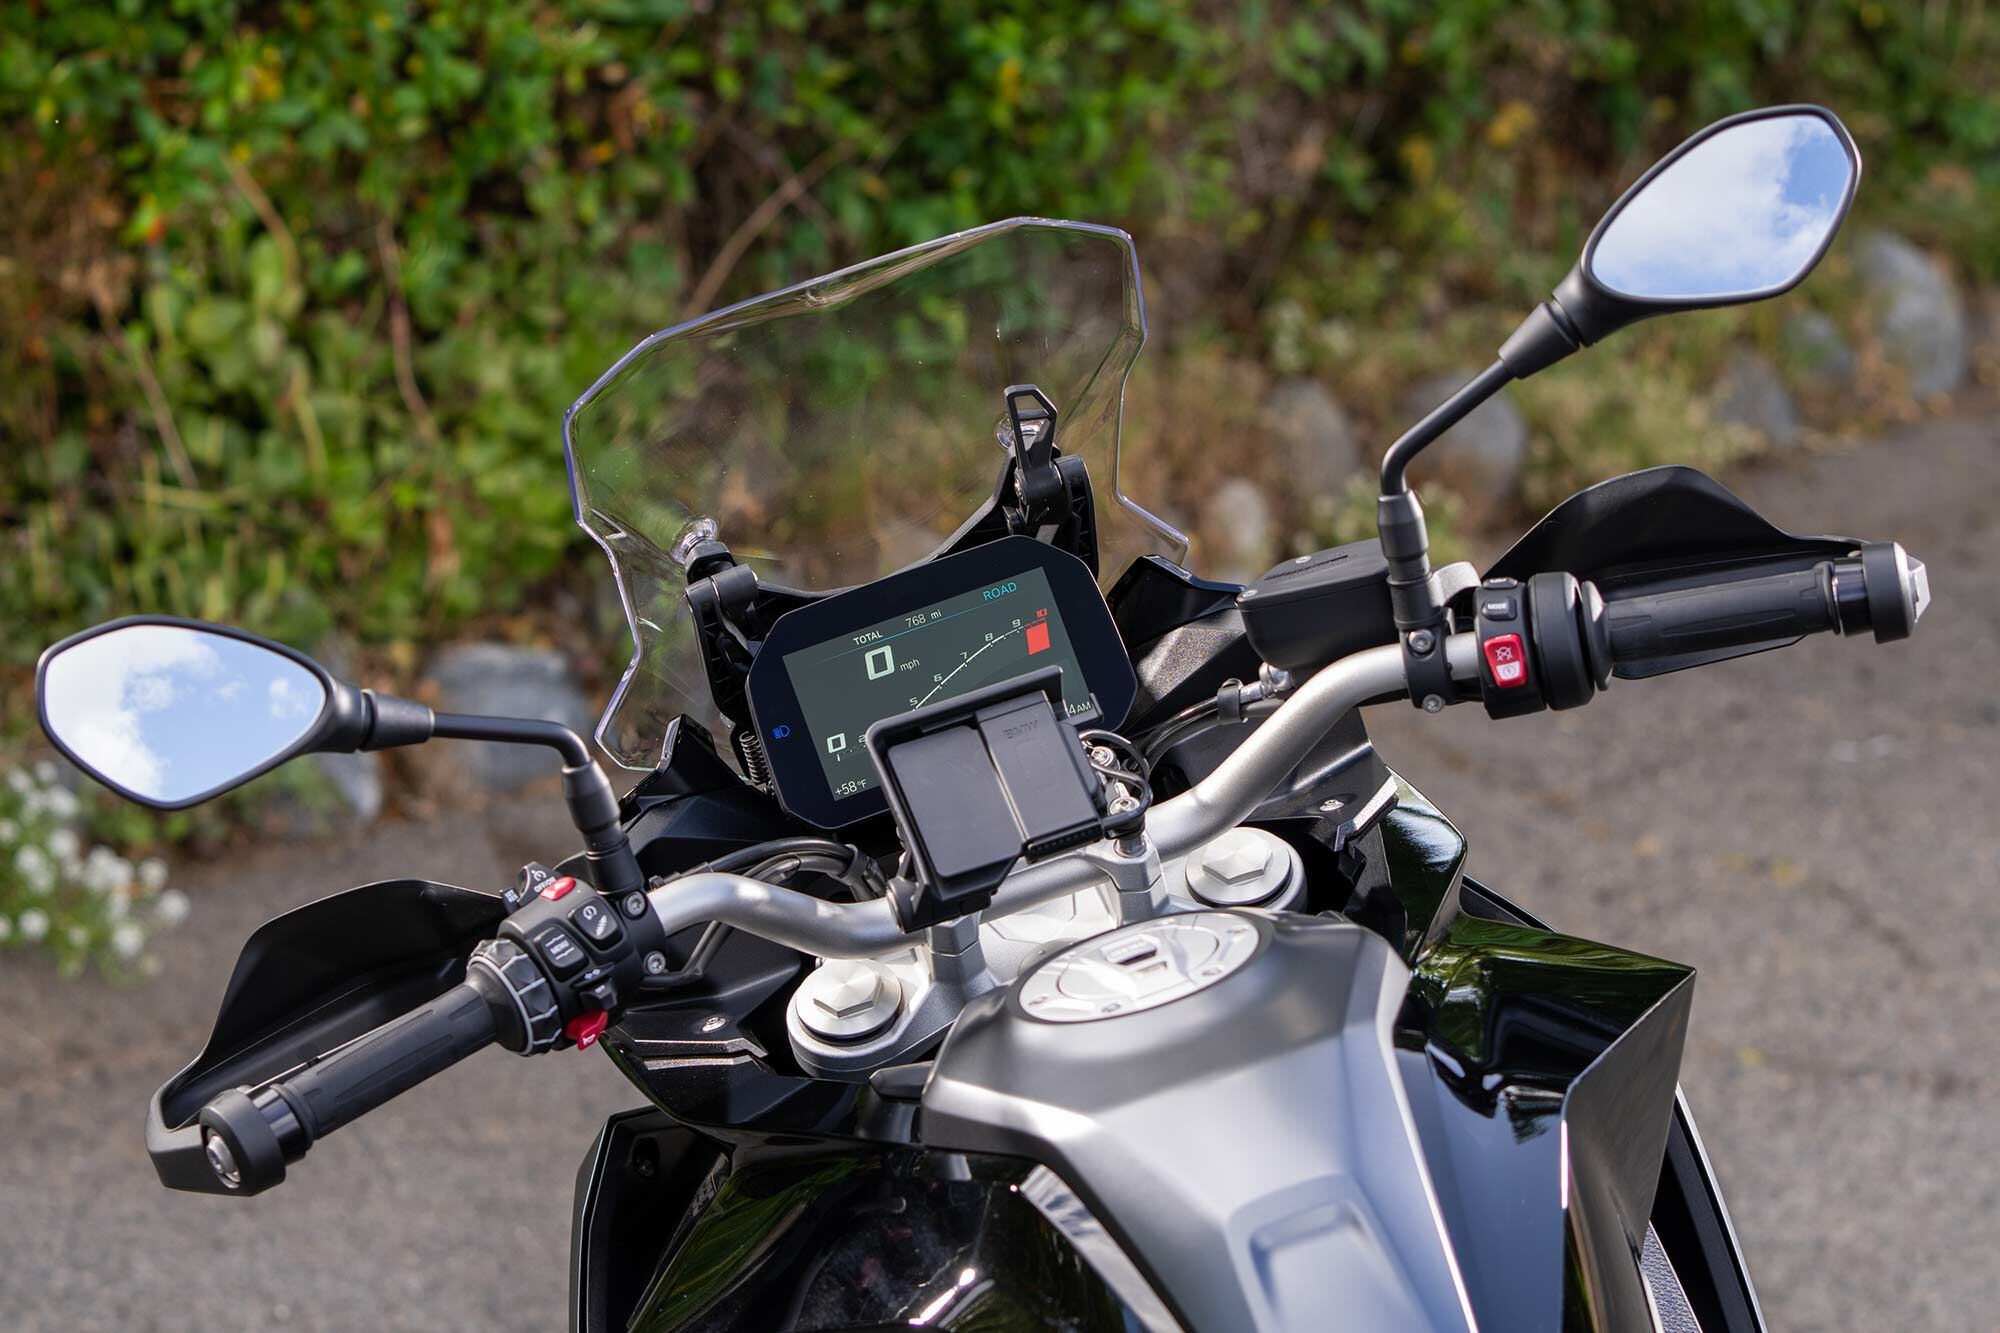 The F 900 XR’s cockpit is well suited for urban riding and light-duty touring escapades.